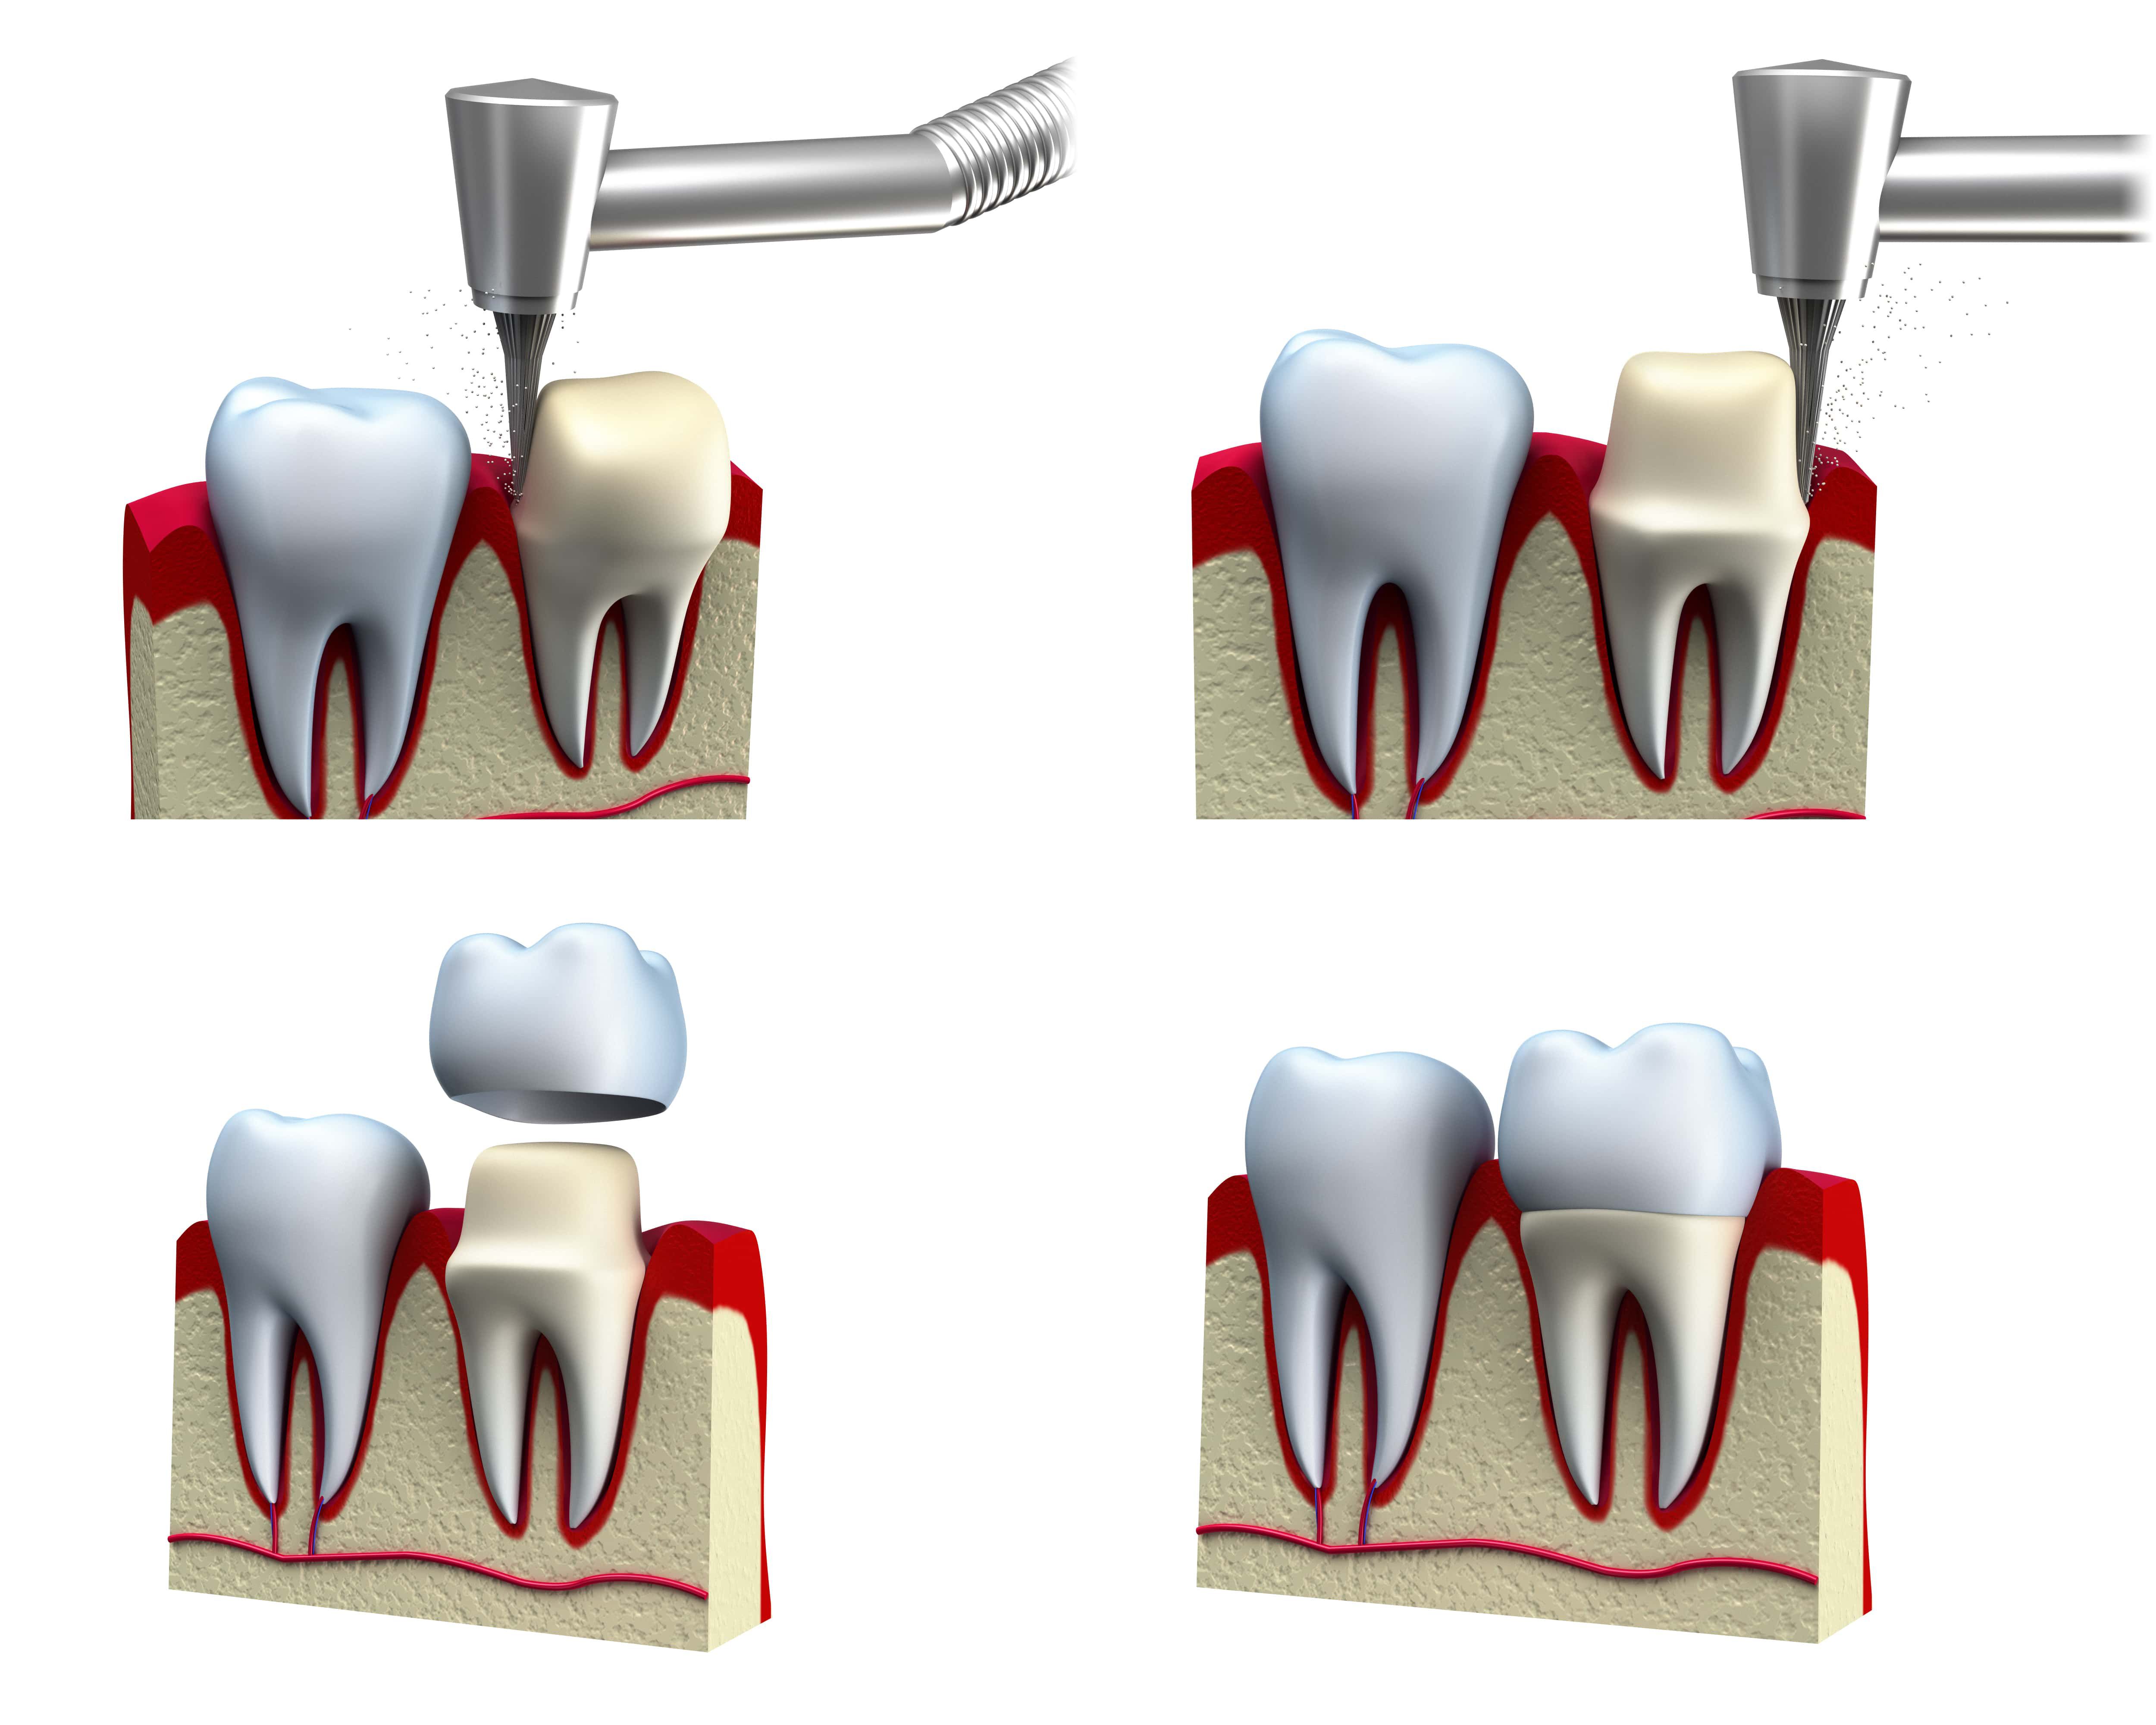 The process of preparing a tooth for a dental crown shown in four steps